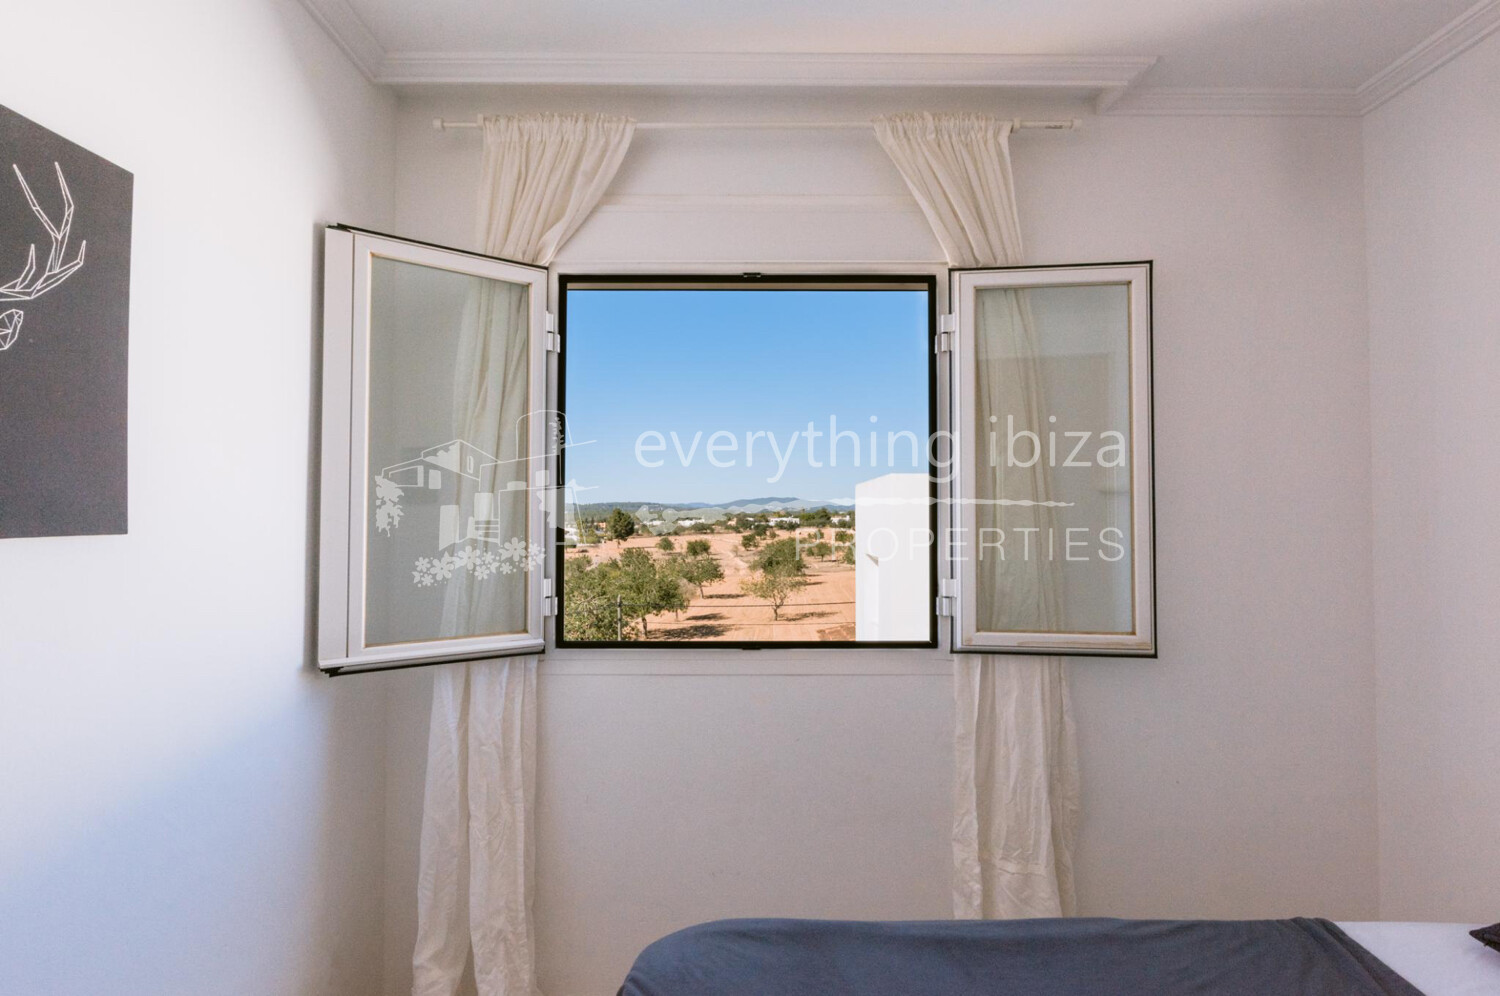 Charming Penthouse Apartment with Large Roof Terrace Overlooking Ibiza Town, ref. 1676, for sale in Ibiza by everything ibiza Properties